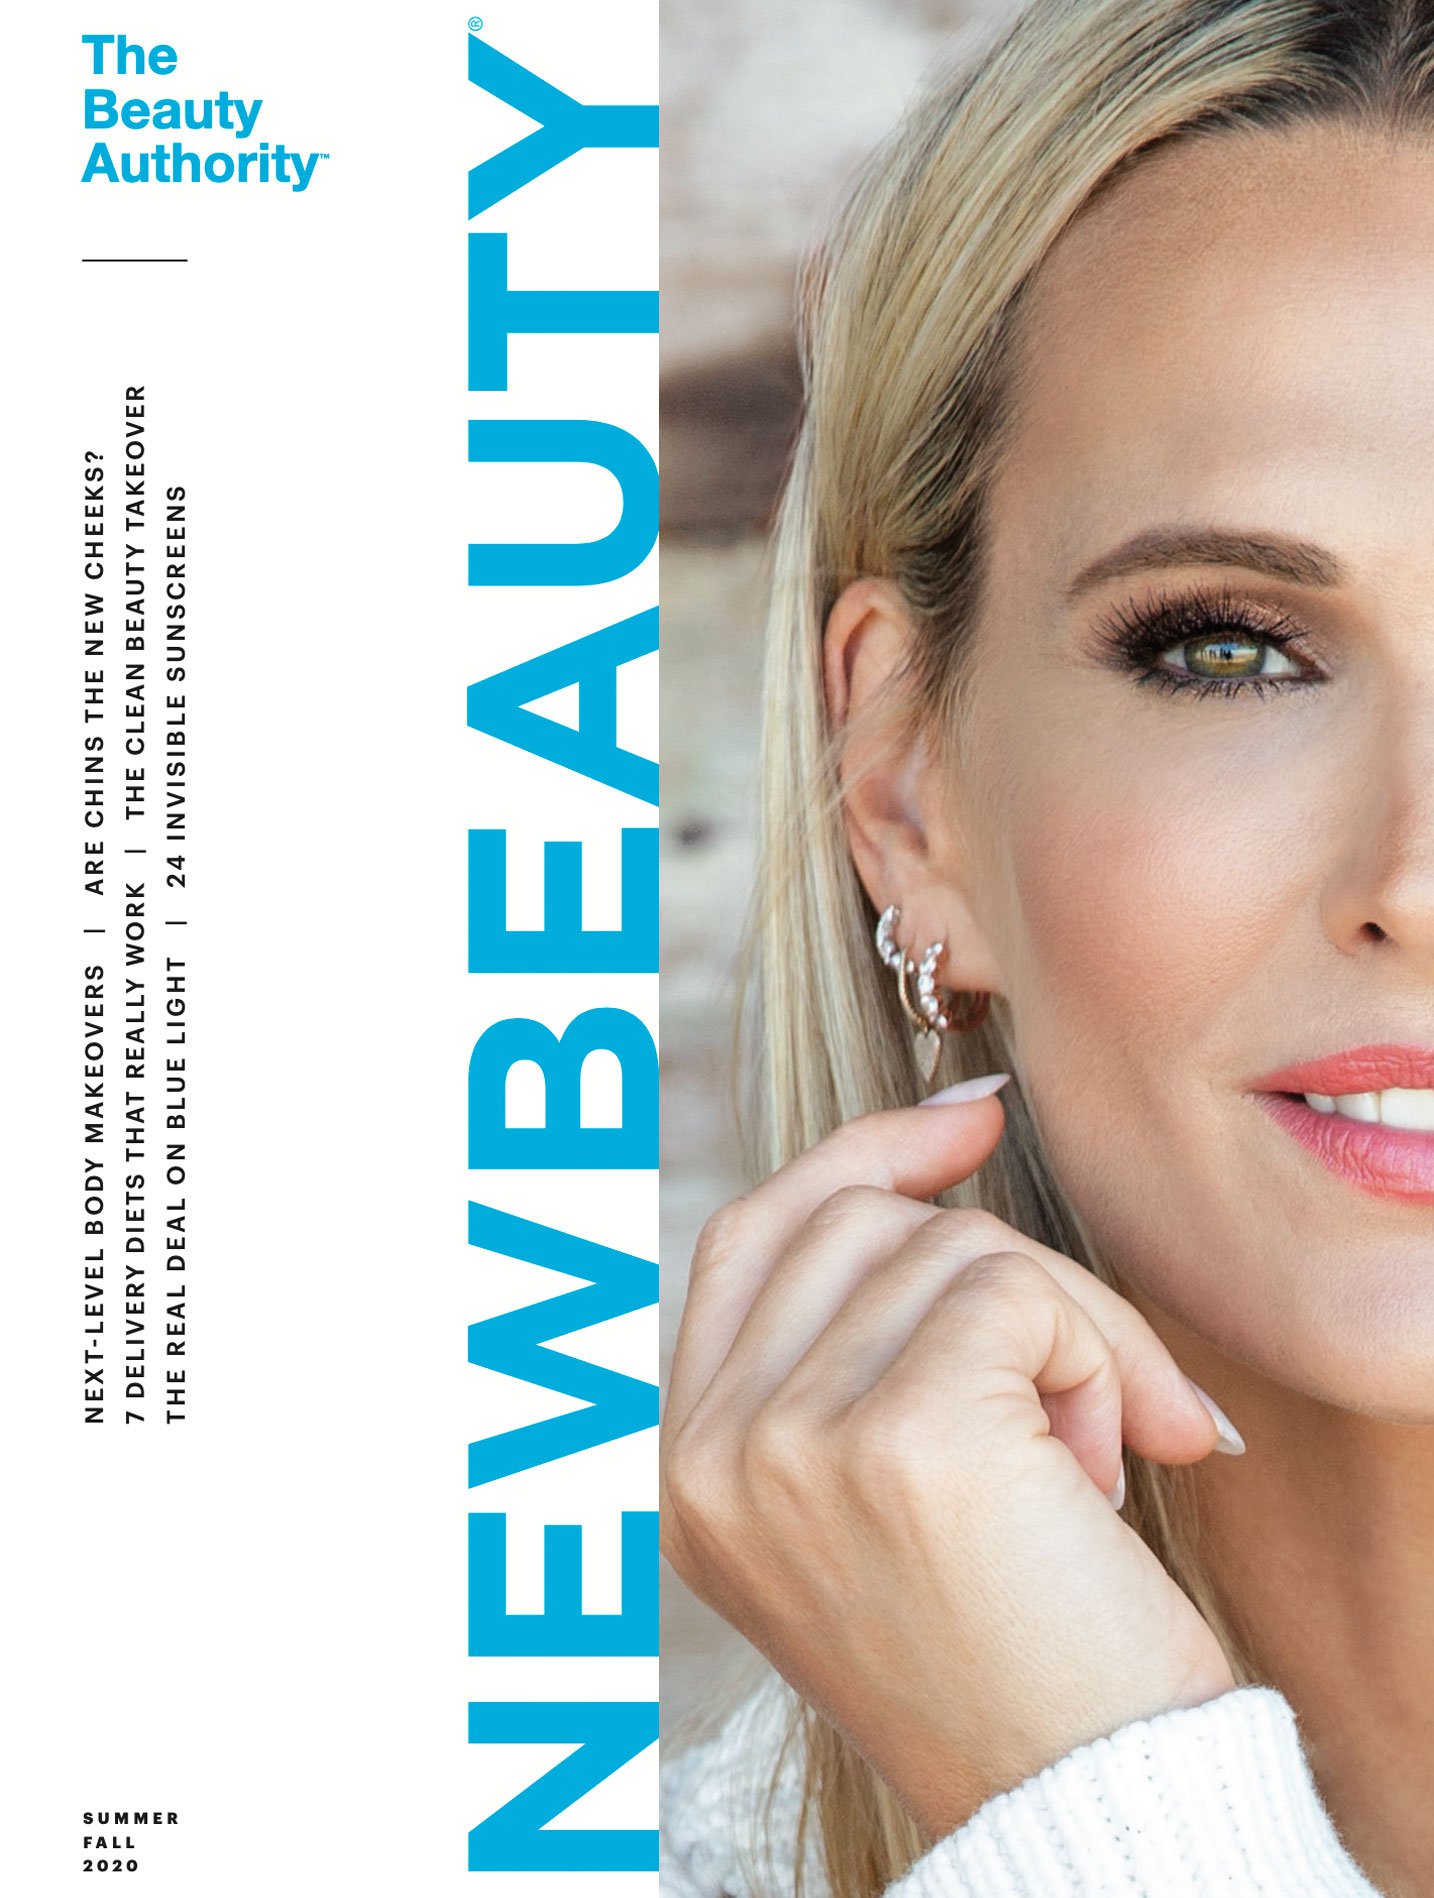 new beauty nonsurgical facial sculpting article